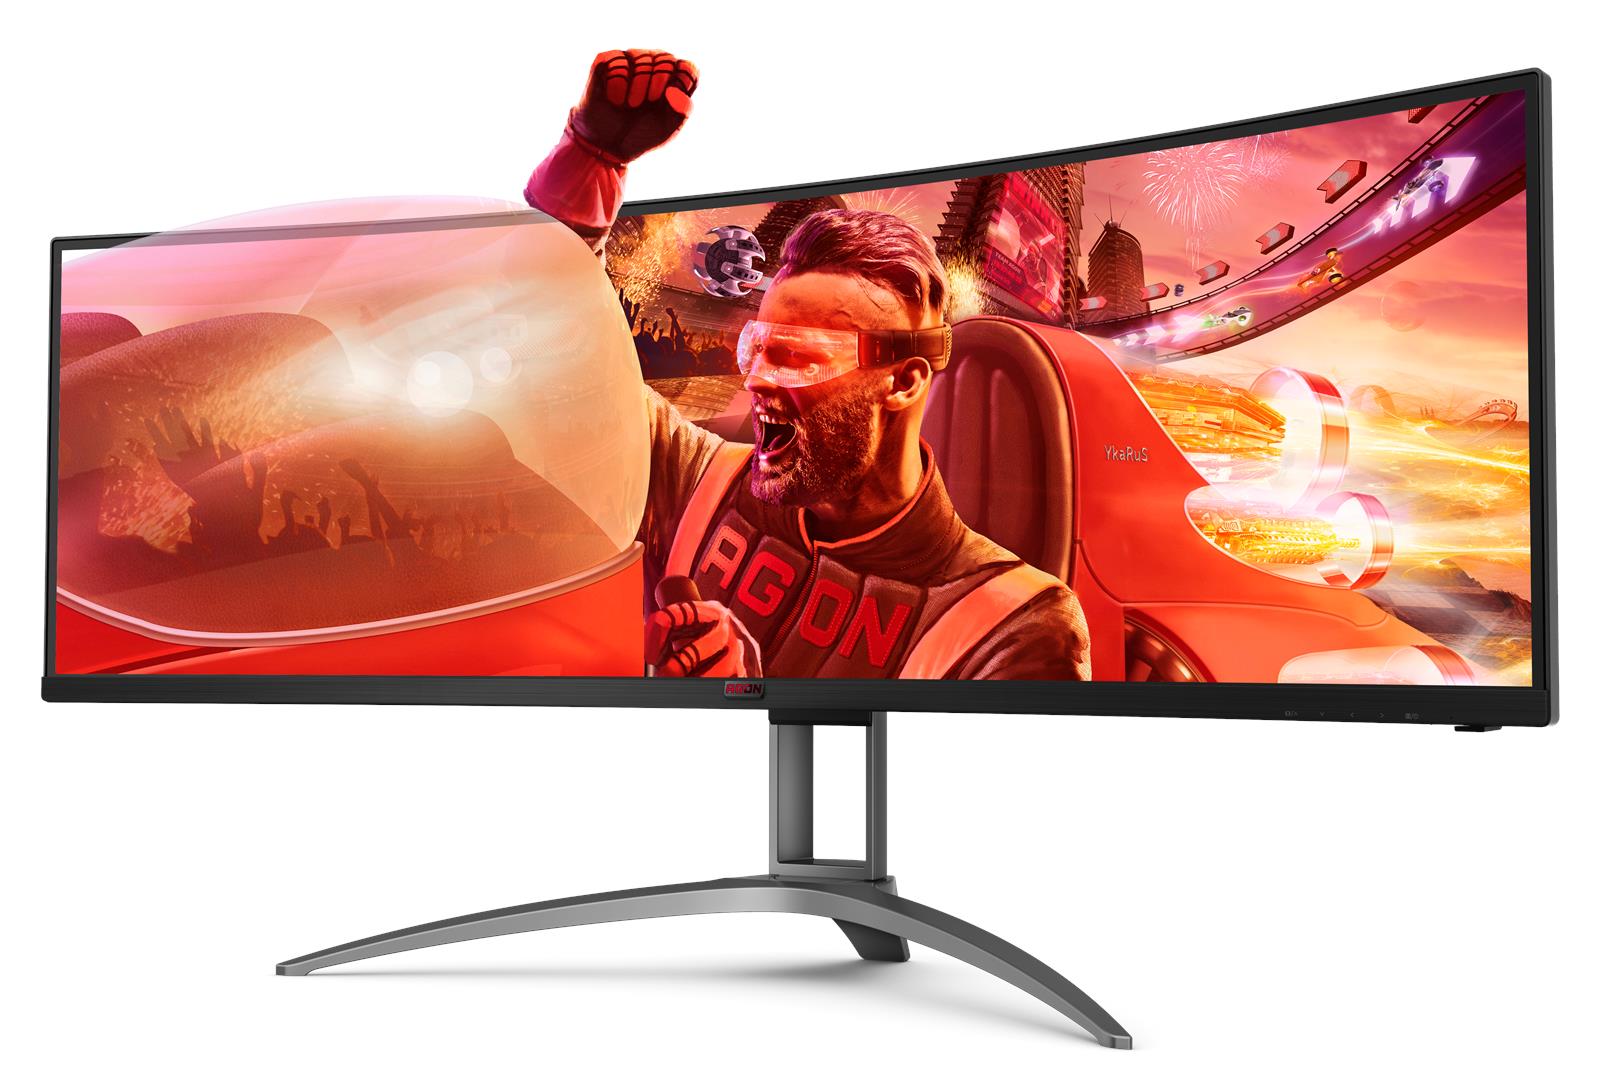 AOC now world’s number 1 in gaming monitors for a year